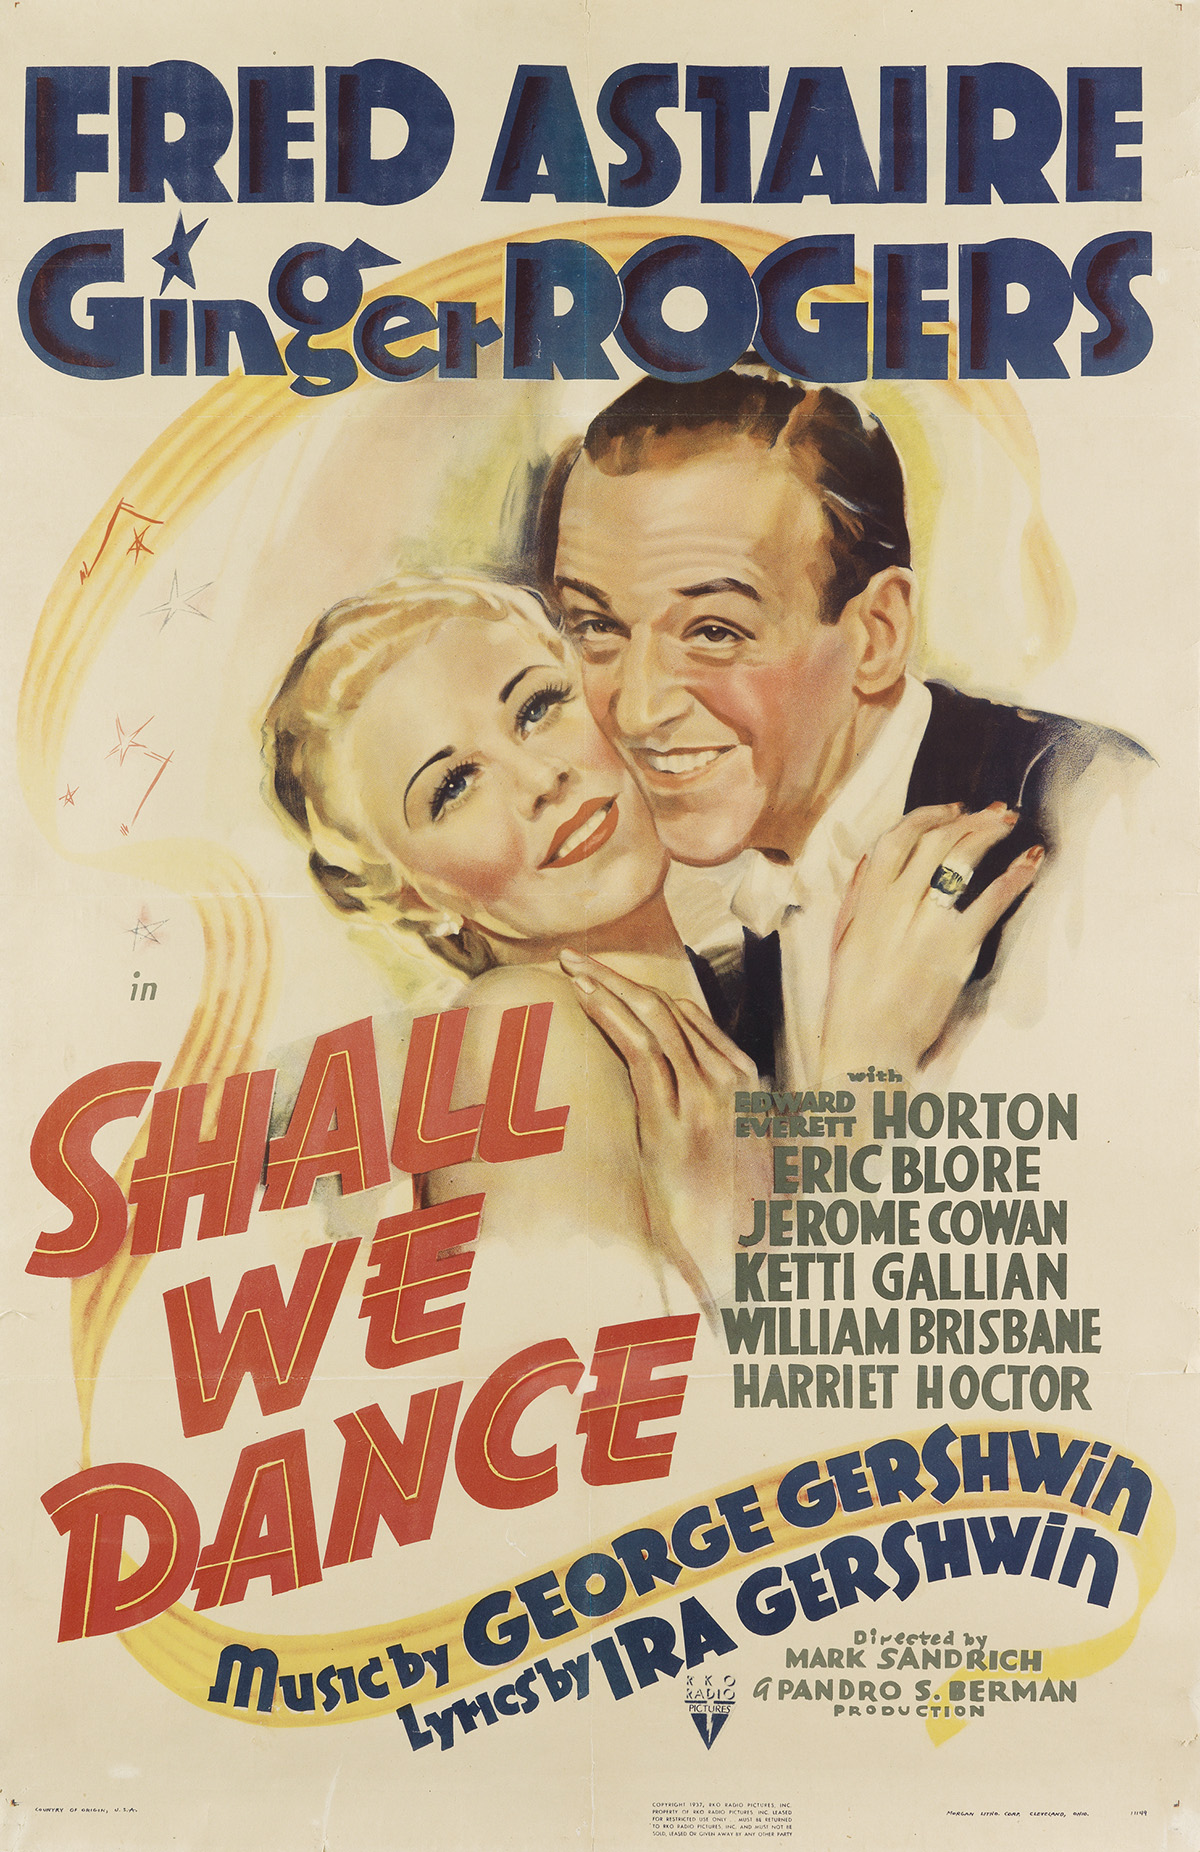 DESIGNER UNKNOWN. SHALL WE DANCE / FRED ASTAIRE / GINGER ROGERS. 1937. 39x25 inches, 101x65 cm. Morgan Lith. Corp., Cleveland.